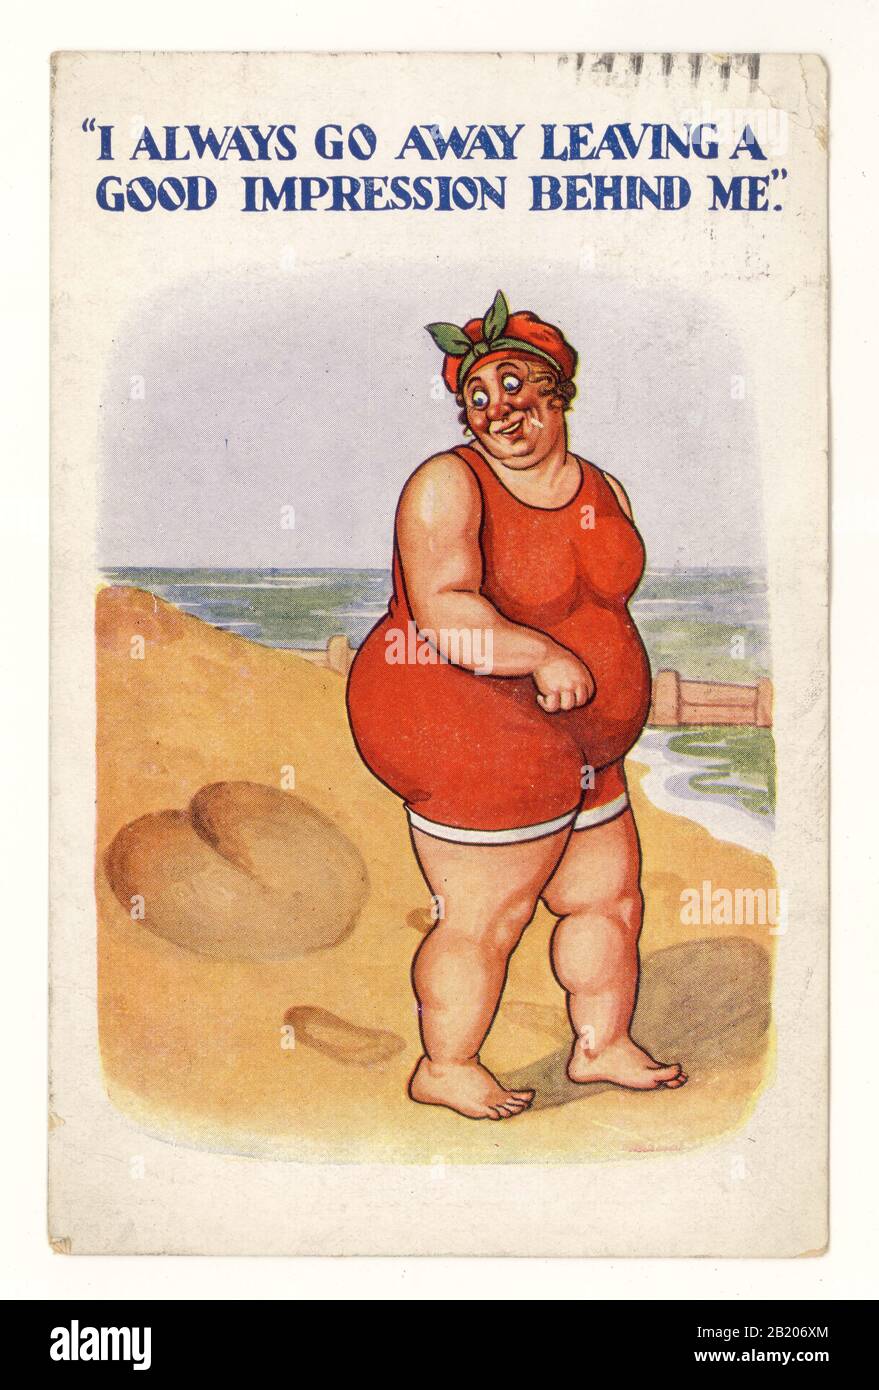 Original early 1900's vintage comic seaside postcard of fat bottomed woman at a beach leaving an impression behind, posted May 1935, U.K. Stock Photo